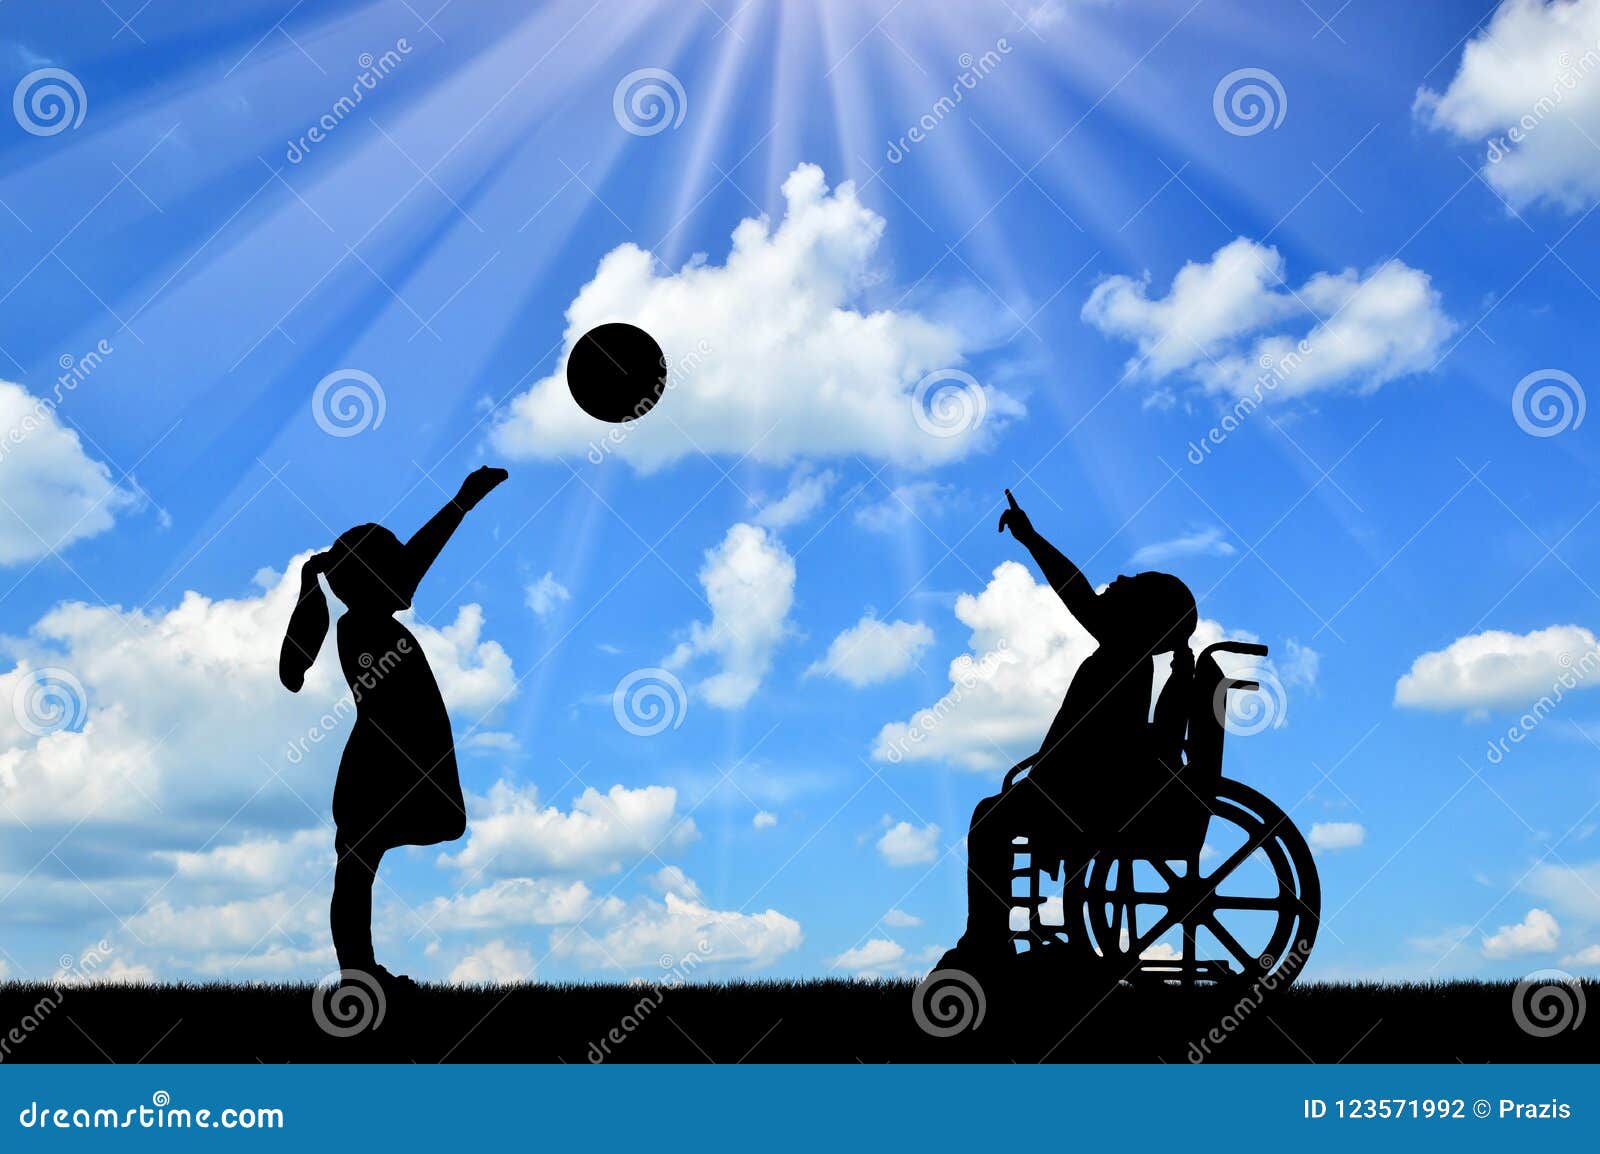 silhouette of a disabled child girl in a wheelchair and healthy girl playing in a ball outdoors